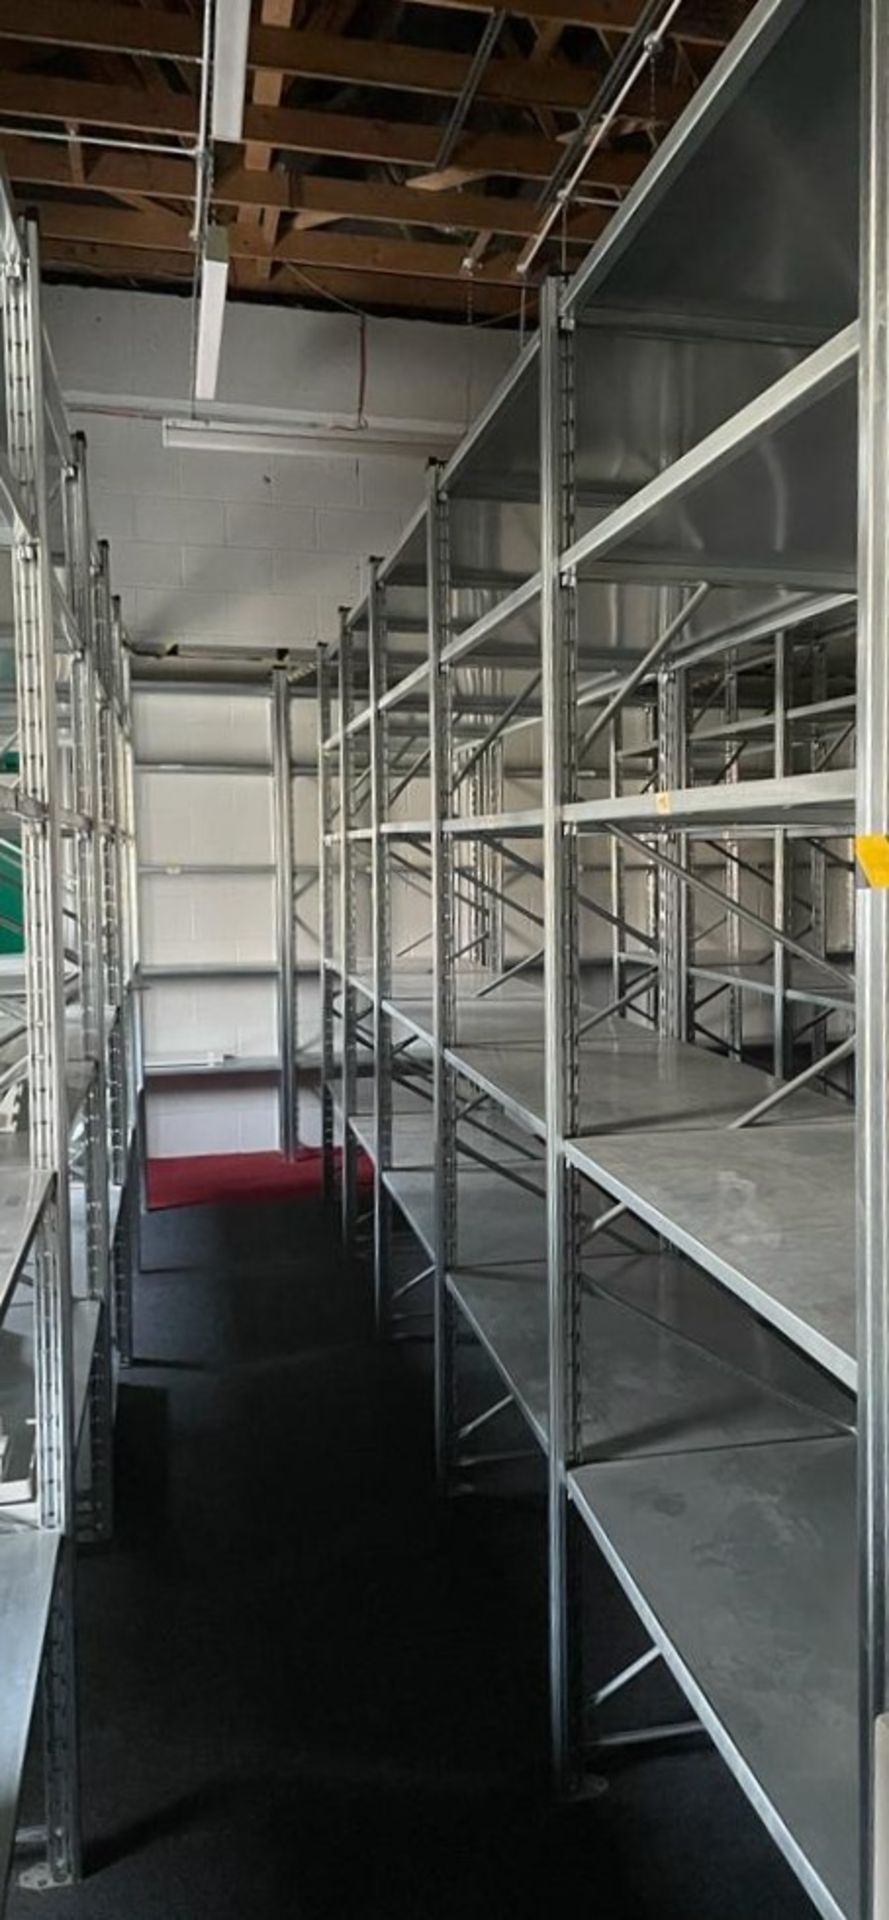 10 x Bays of High Quality Galvanised Steel Warehouse Shelving - Bay Dimensions: H250 x W100 x D60 - Image 6 of 12